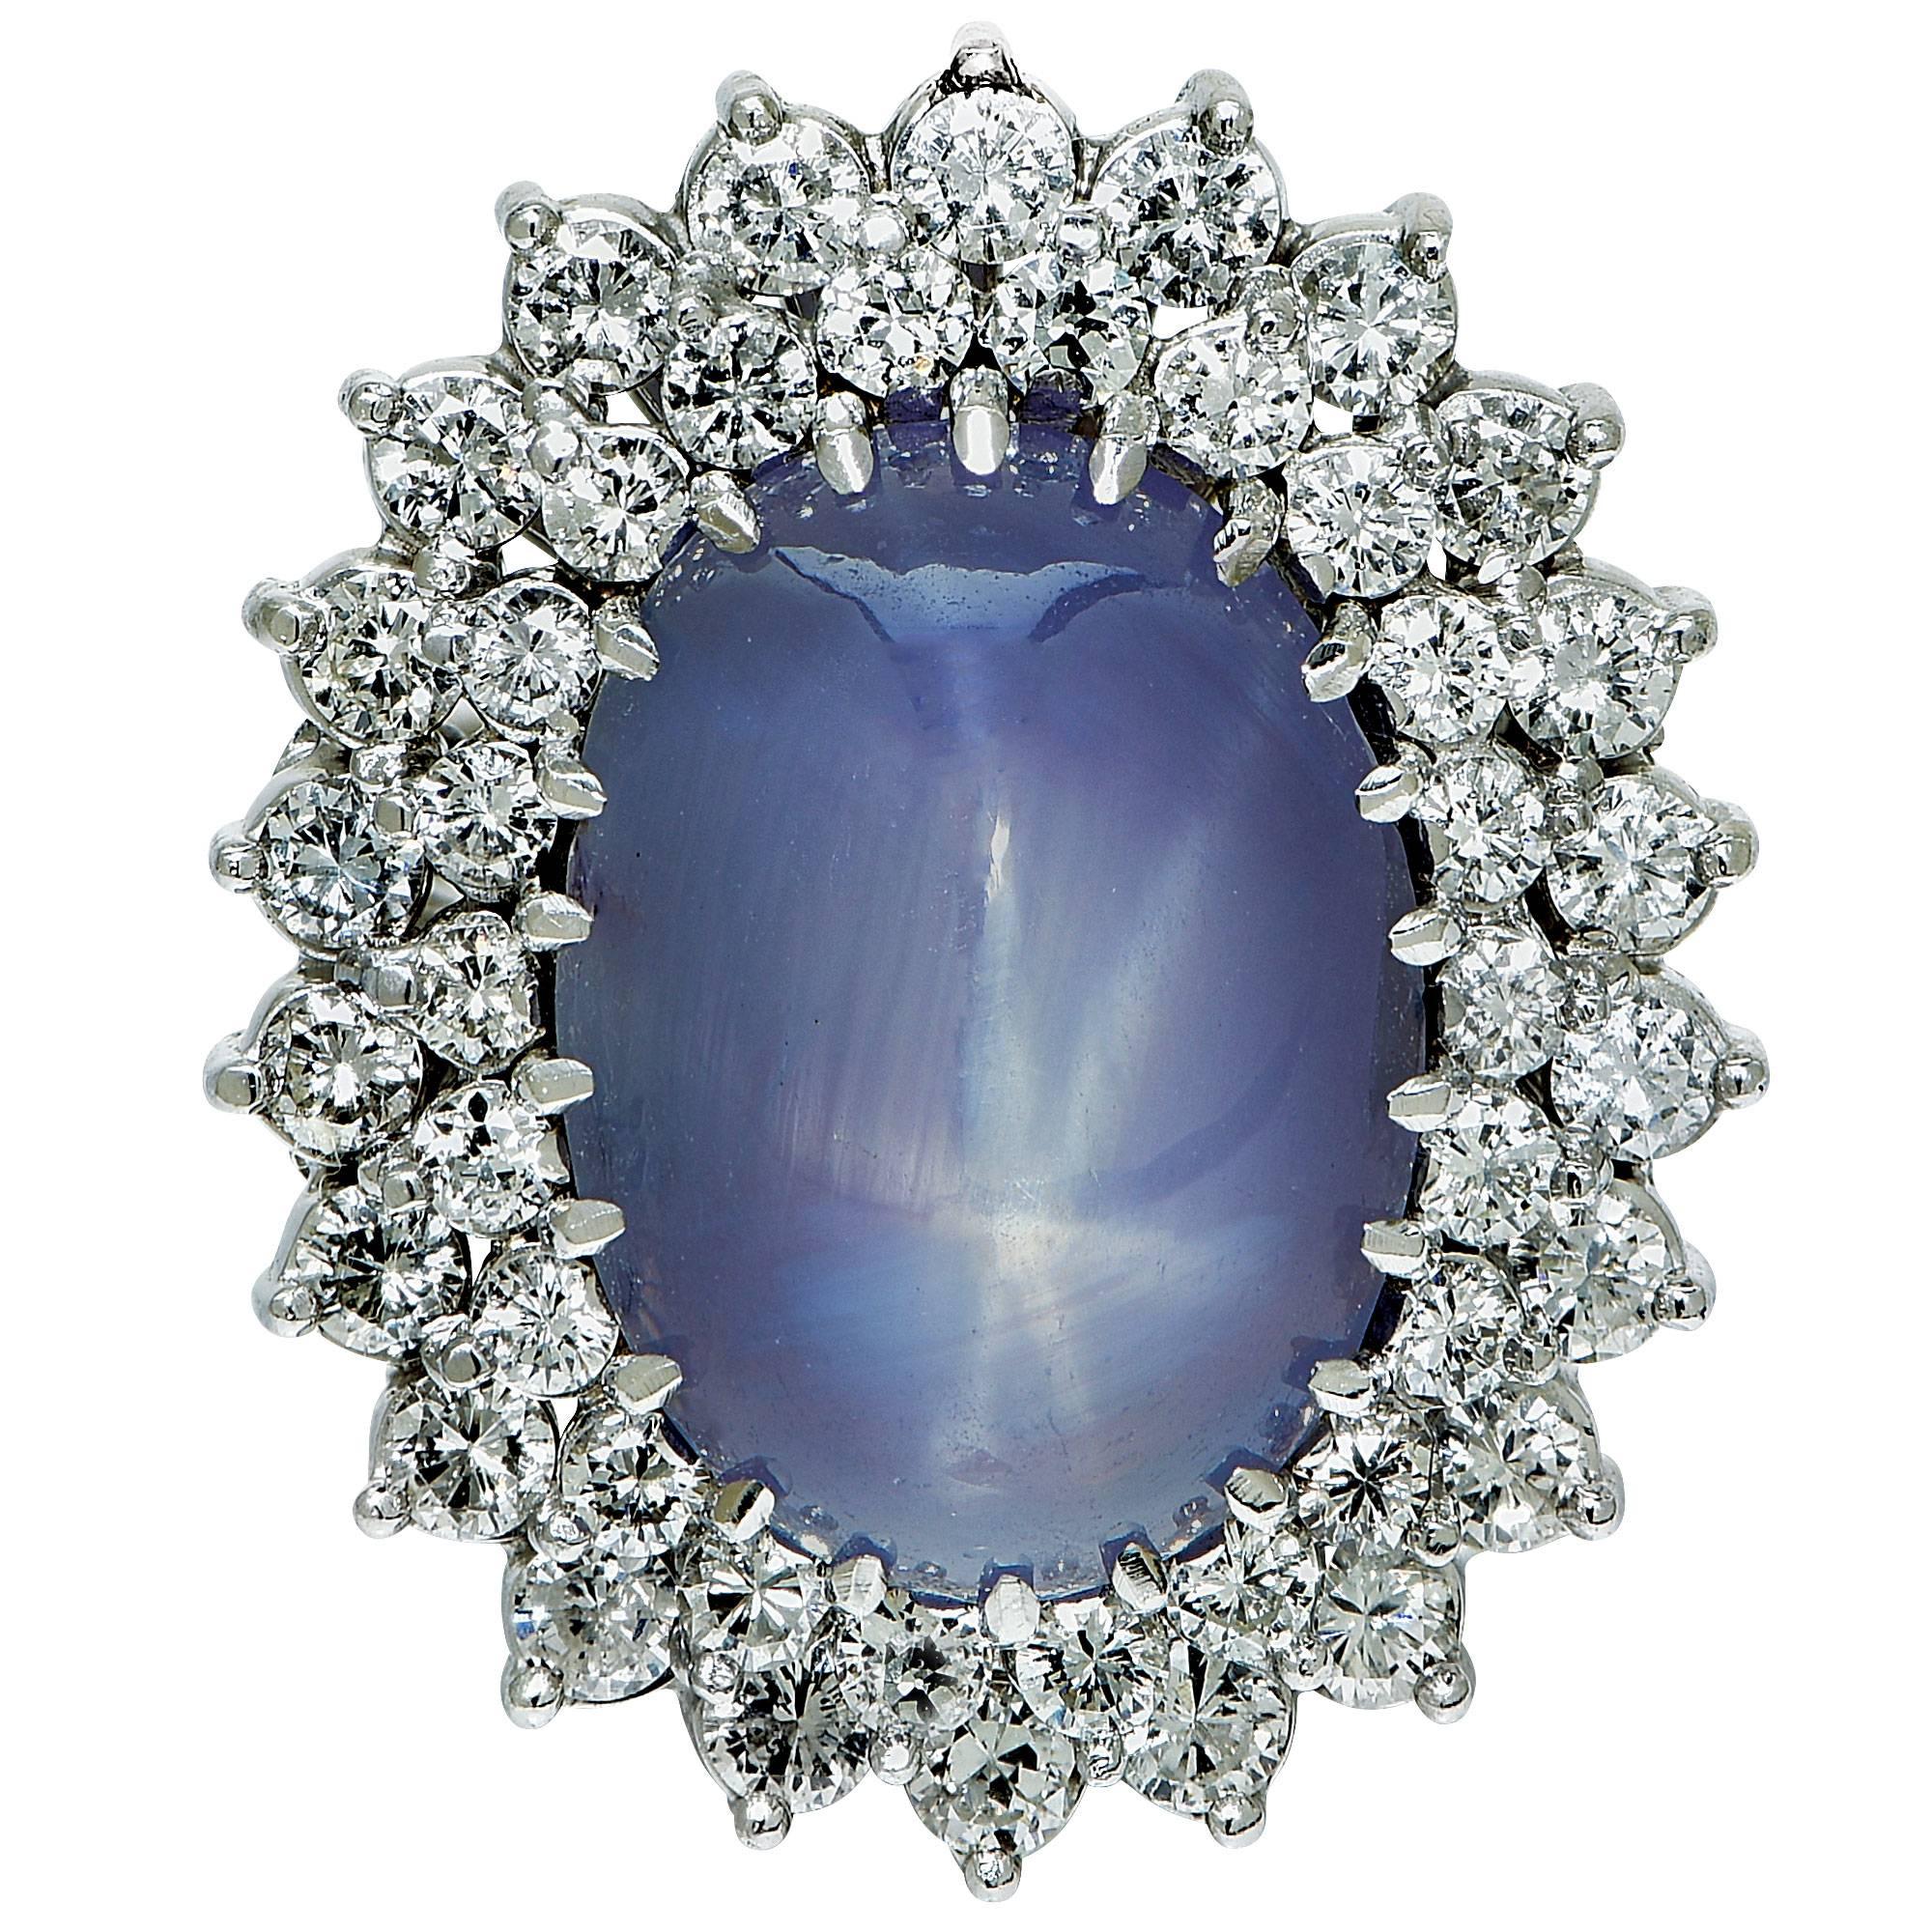 18k white gold ring featuring a cabochon cut star sapphire weighing approximately 27cts accented by 44 round brilliant cut diamonds weighing approximately 2.10cts total G color VS-SI clarity.

Ring size: 8 (can be sized up or down)
Metal weight: